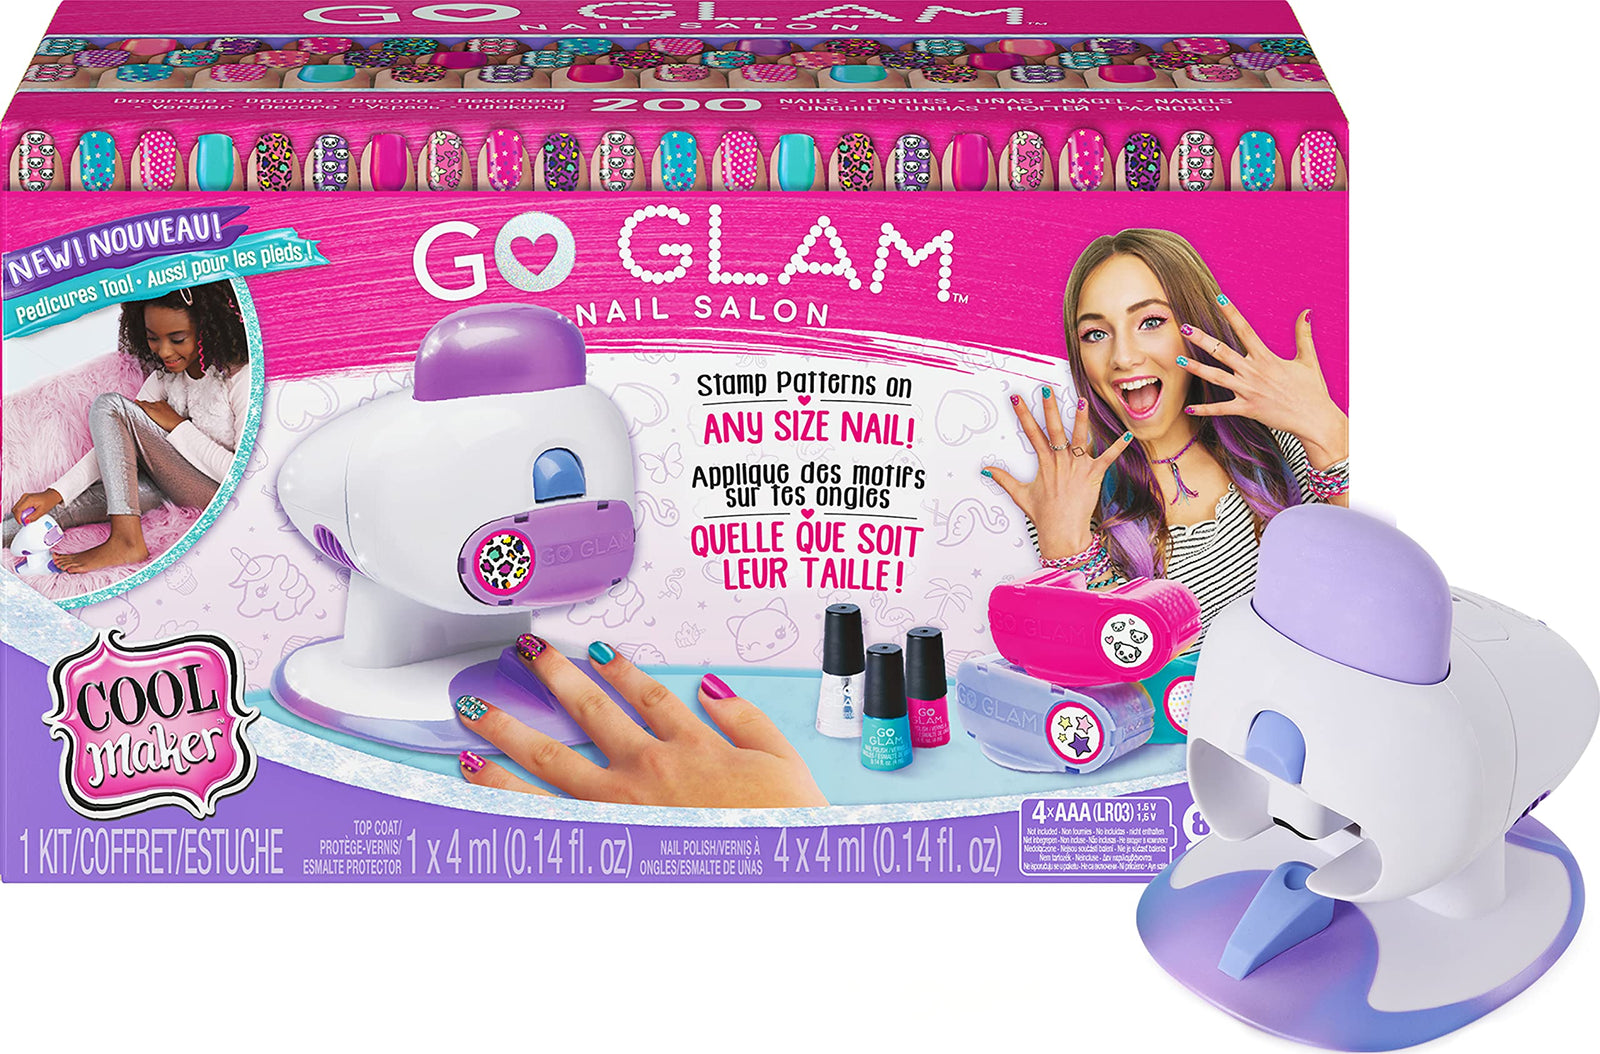 Cool Maker, GO Glam Nail Stamper Deluxe Salon with Dryer for Manicures and Pedicures with 3 Bonus Patterns and 2 Bonus Nail Polishes, Amazon Exclusive